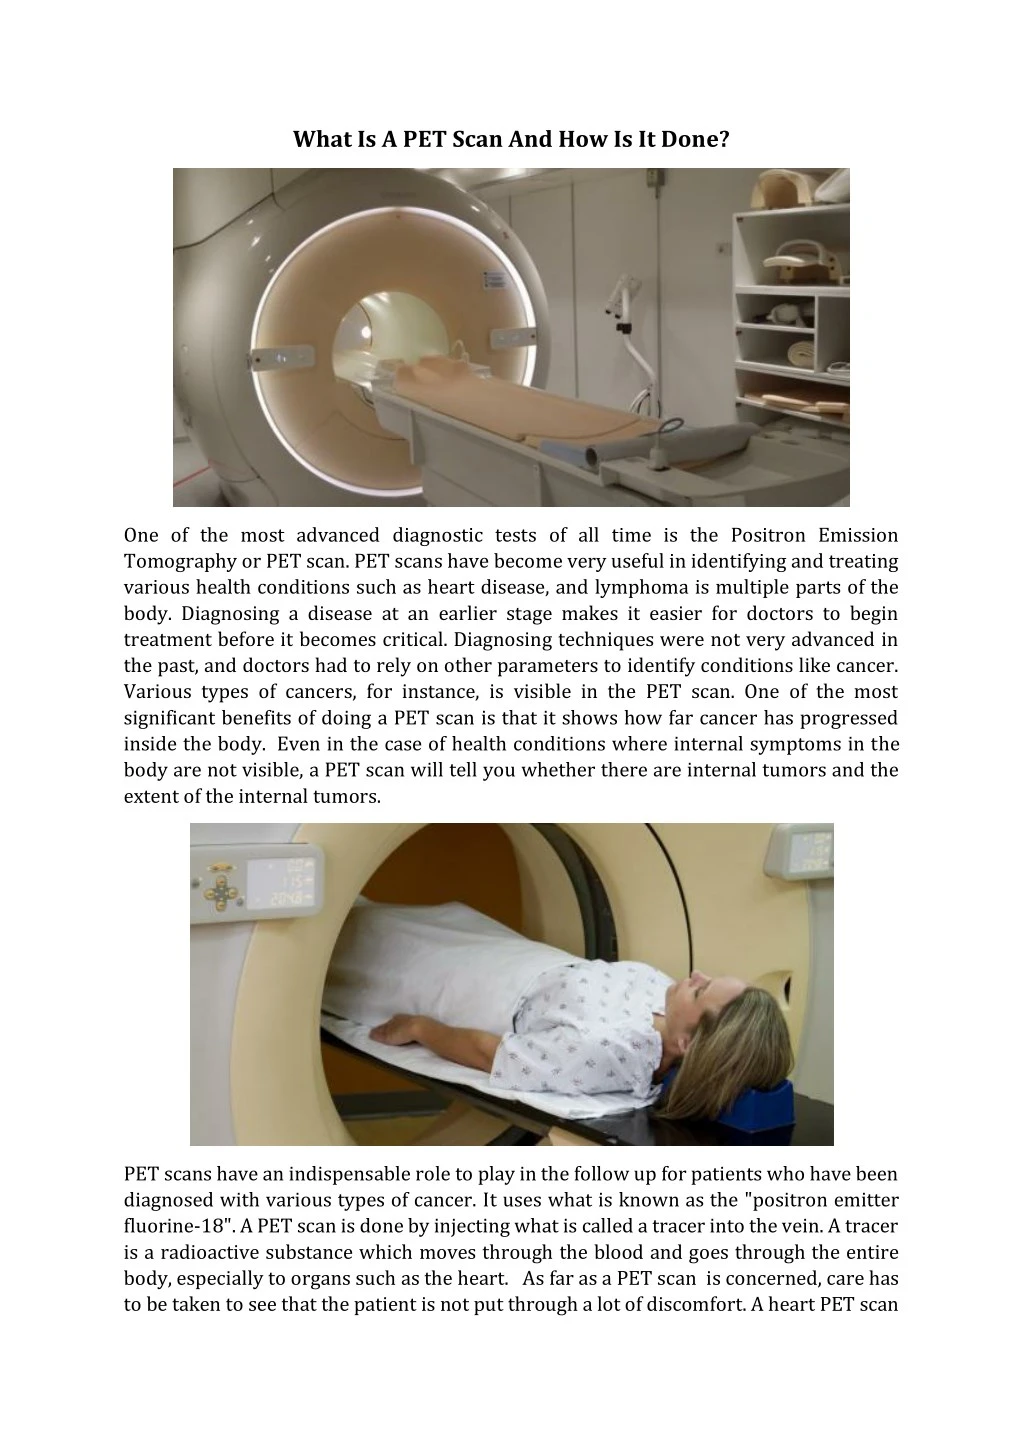 what is a pet scan and how is it done